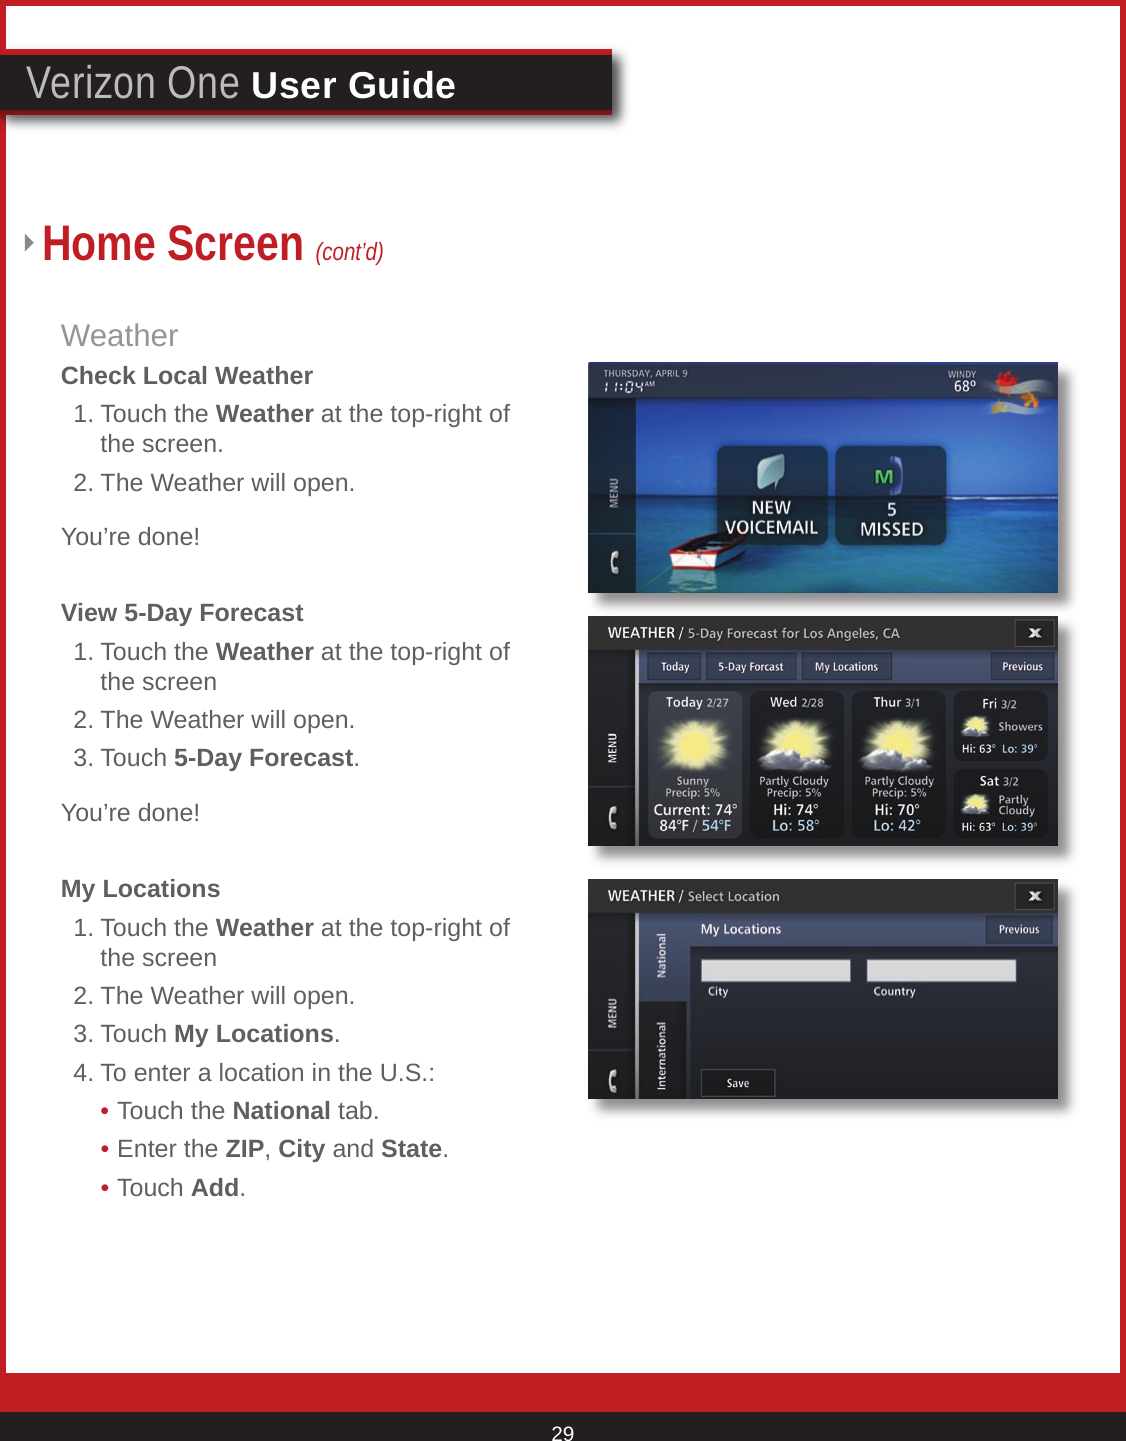 © 2007 Verizon. All Rights Reserved. 29Verizon One User GuideWeatherCheck Local Weather  1. Touch the Weather at the top-right of      the screen.  2. The Weather will open.You’re done! View 5-Day Forecast  1. Touch the Weather at the top-right of      the screen  2. The Weather will open.  3. Touch 5-Day Forecast.You’re done! My Locations  1. Touch the Weather at the top-right of      the screen  2. The Weather will open.  3. Touch My Locations.  4. To enter a location in the U.S.:    • Touch the National tab.    • Enter the ZIP, City and State.    • Touch Add.Home Screen (cont’d)Weather screen